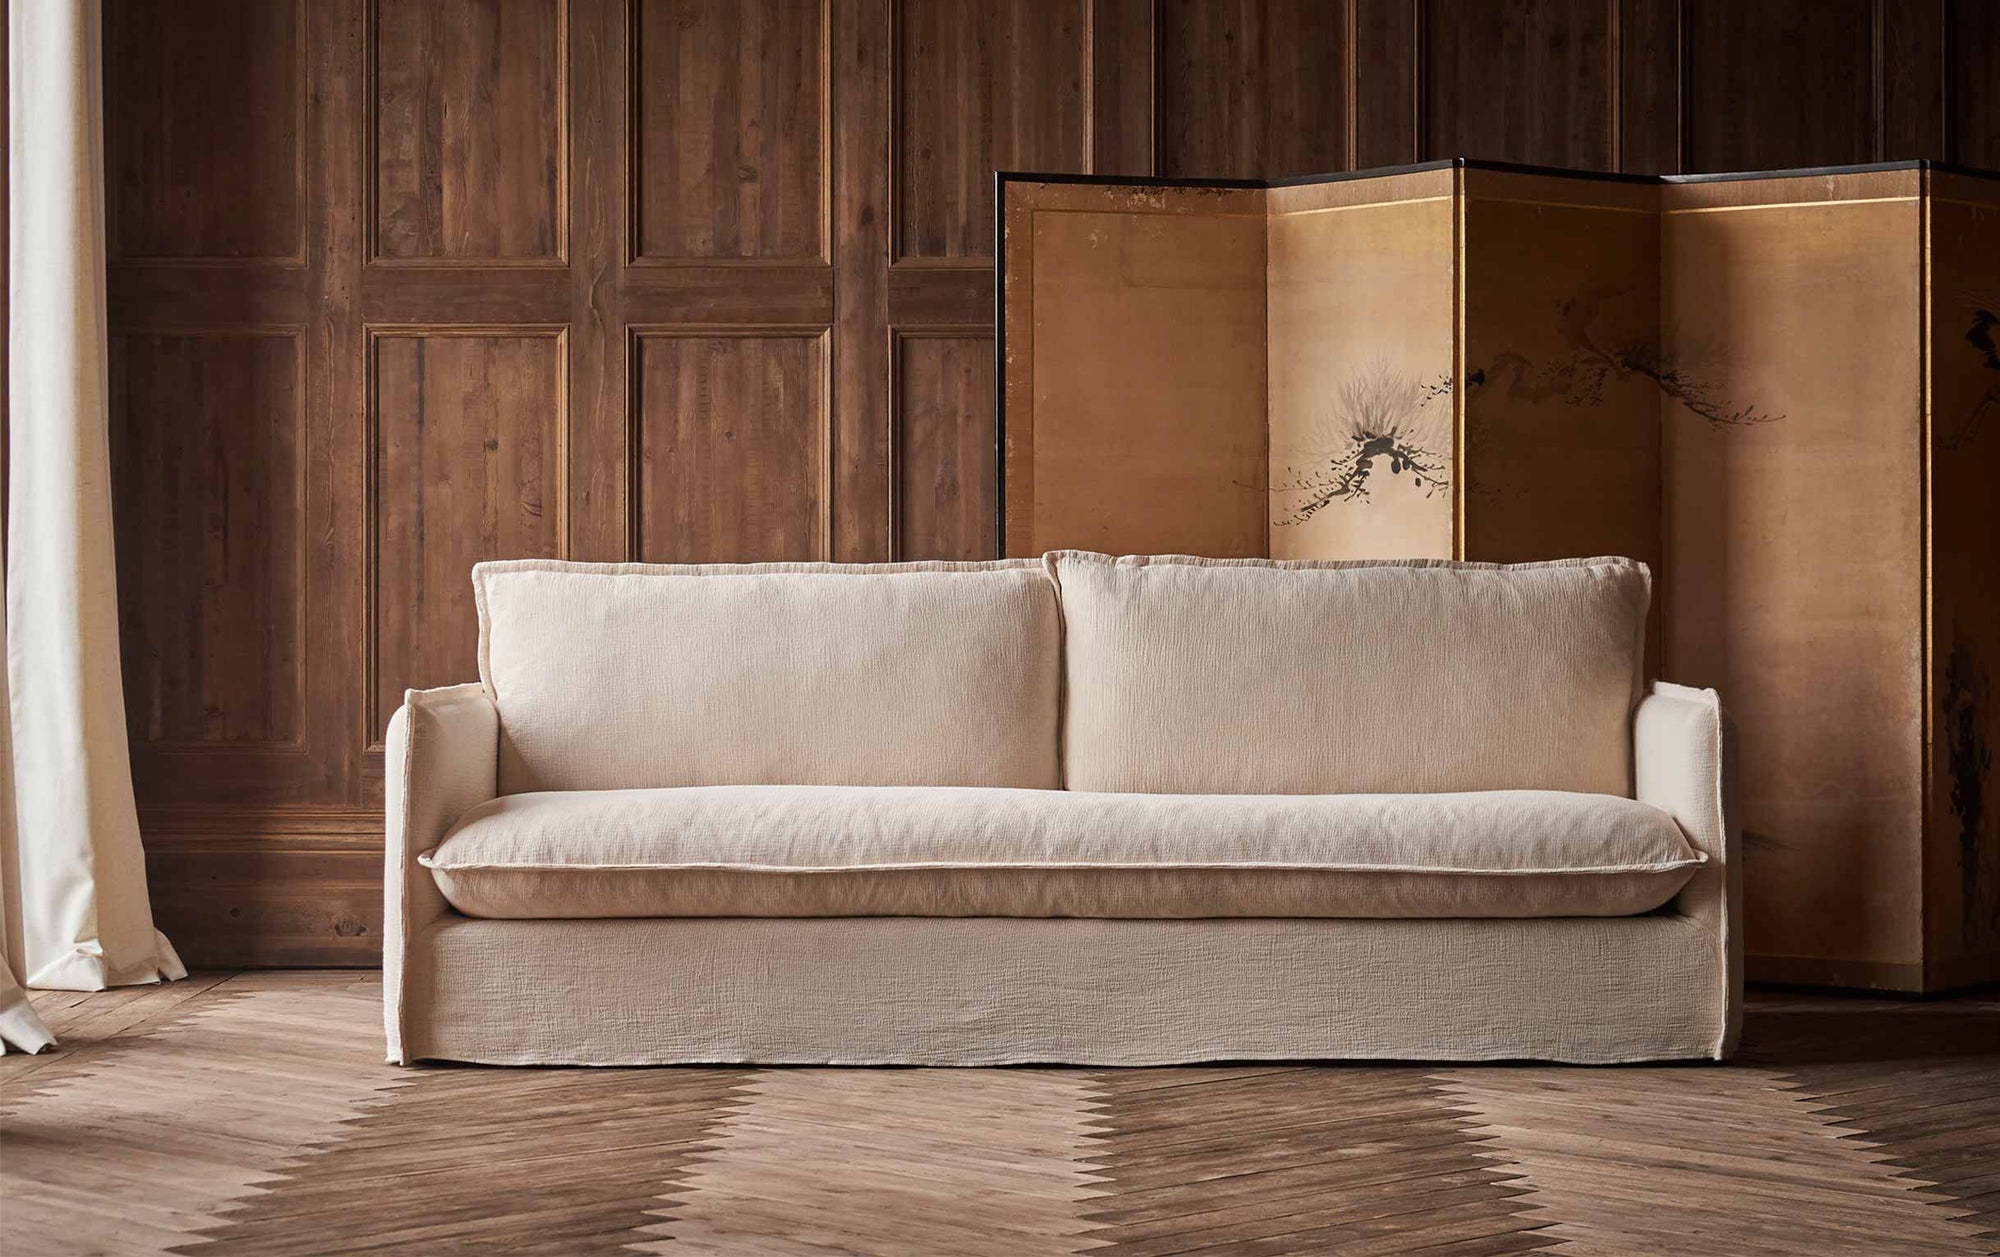 Neva 96" Sofa in Corn Silk, a light beige Washed Cotton Linen, placed in a wood-panelled room in front of a decorative folding screen